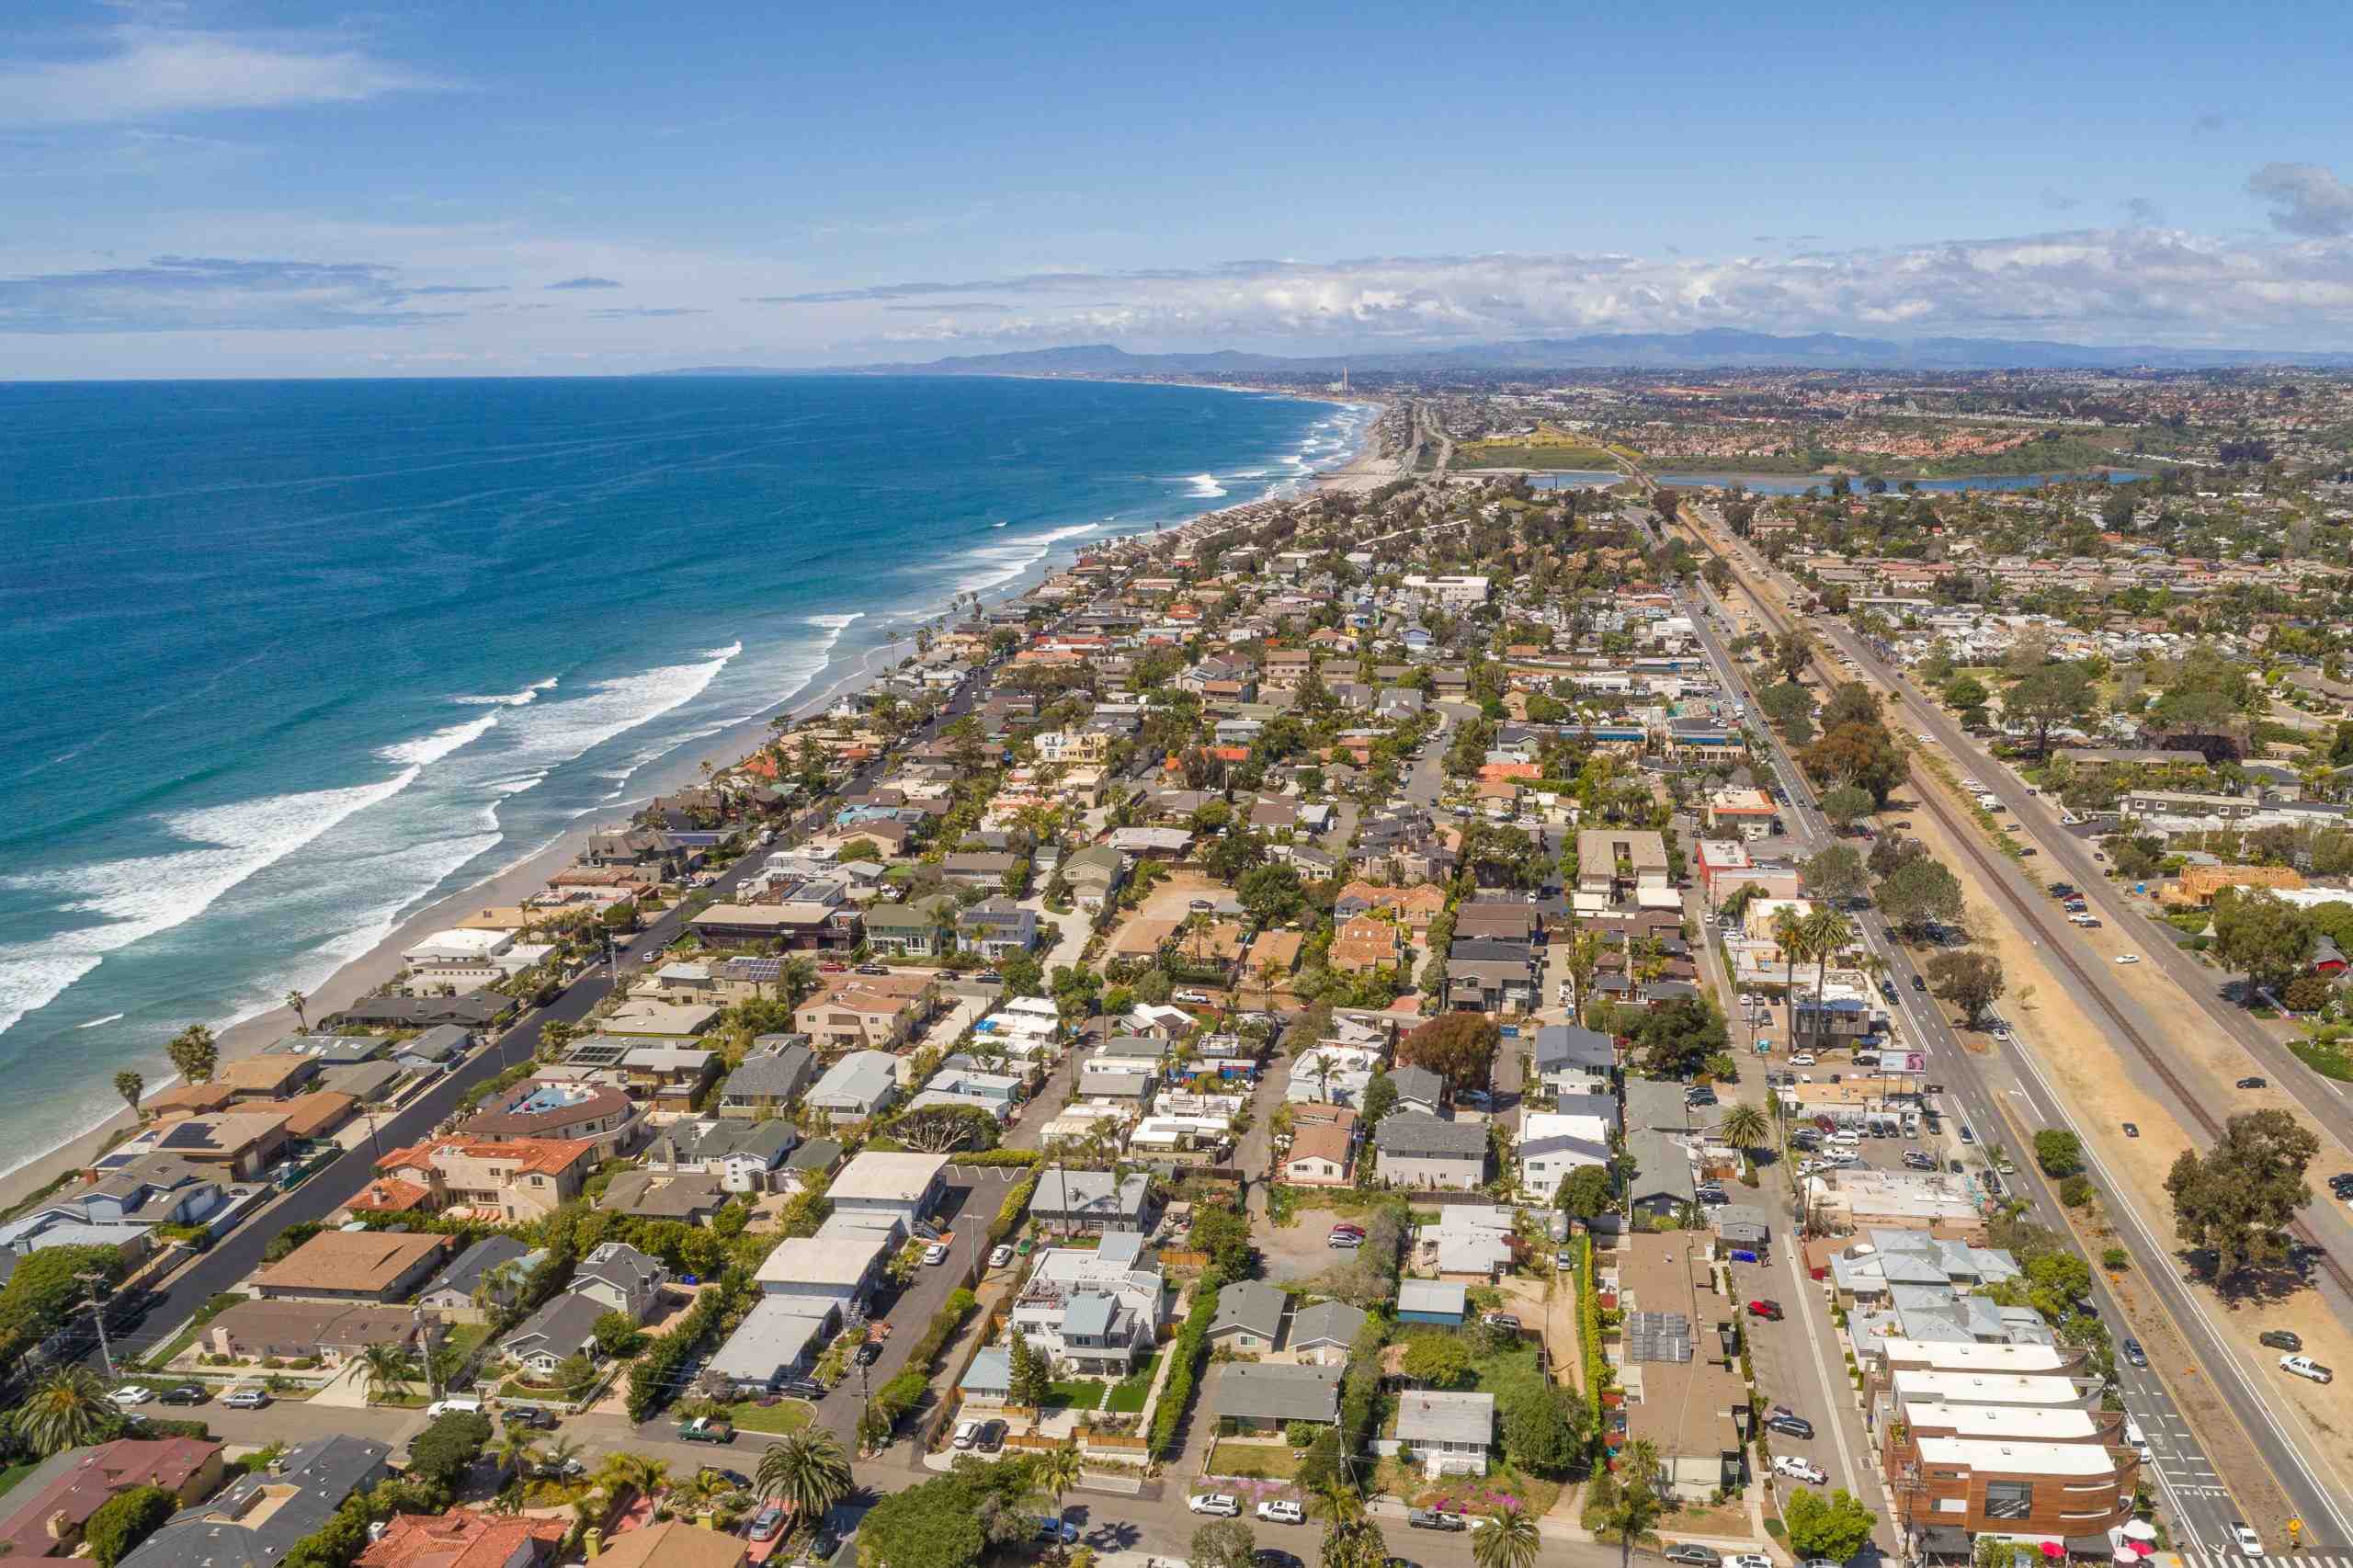 Find out what's happening in Encinitaswith free, real-time updates from Patch.